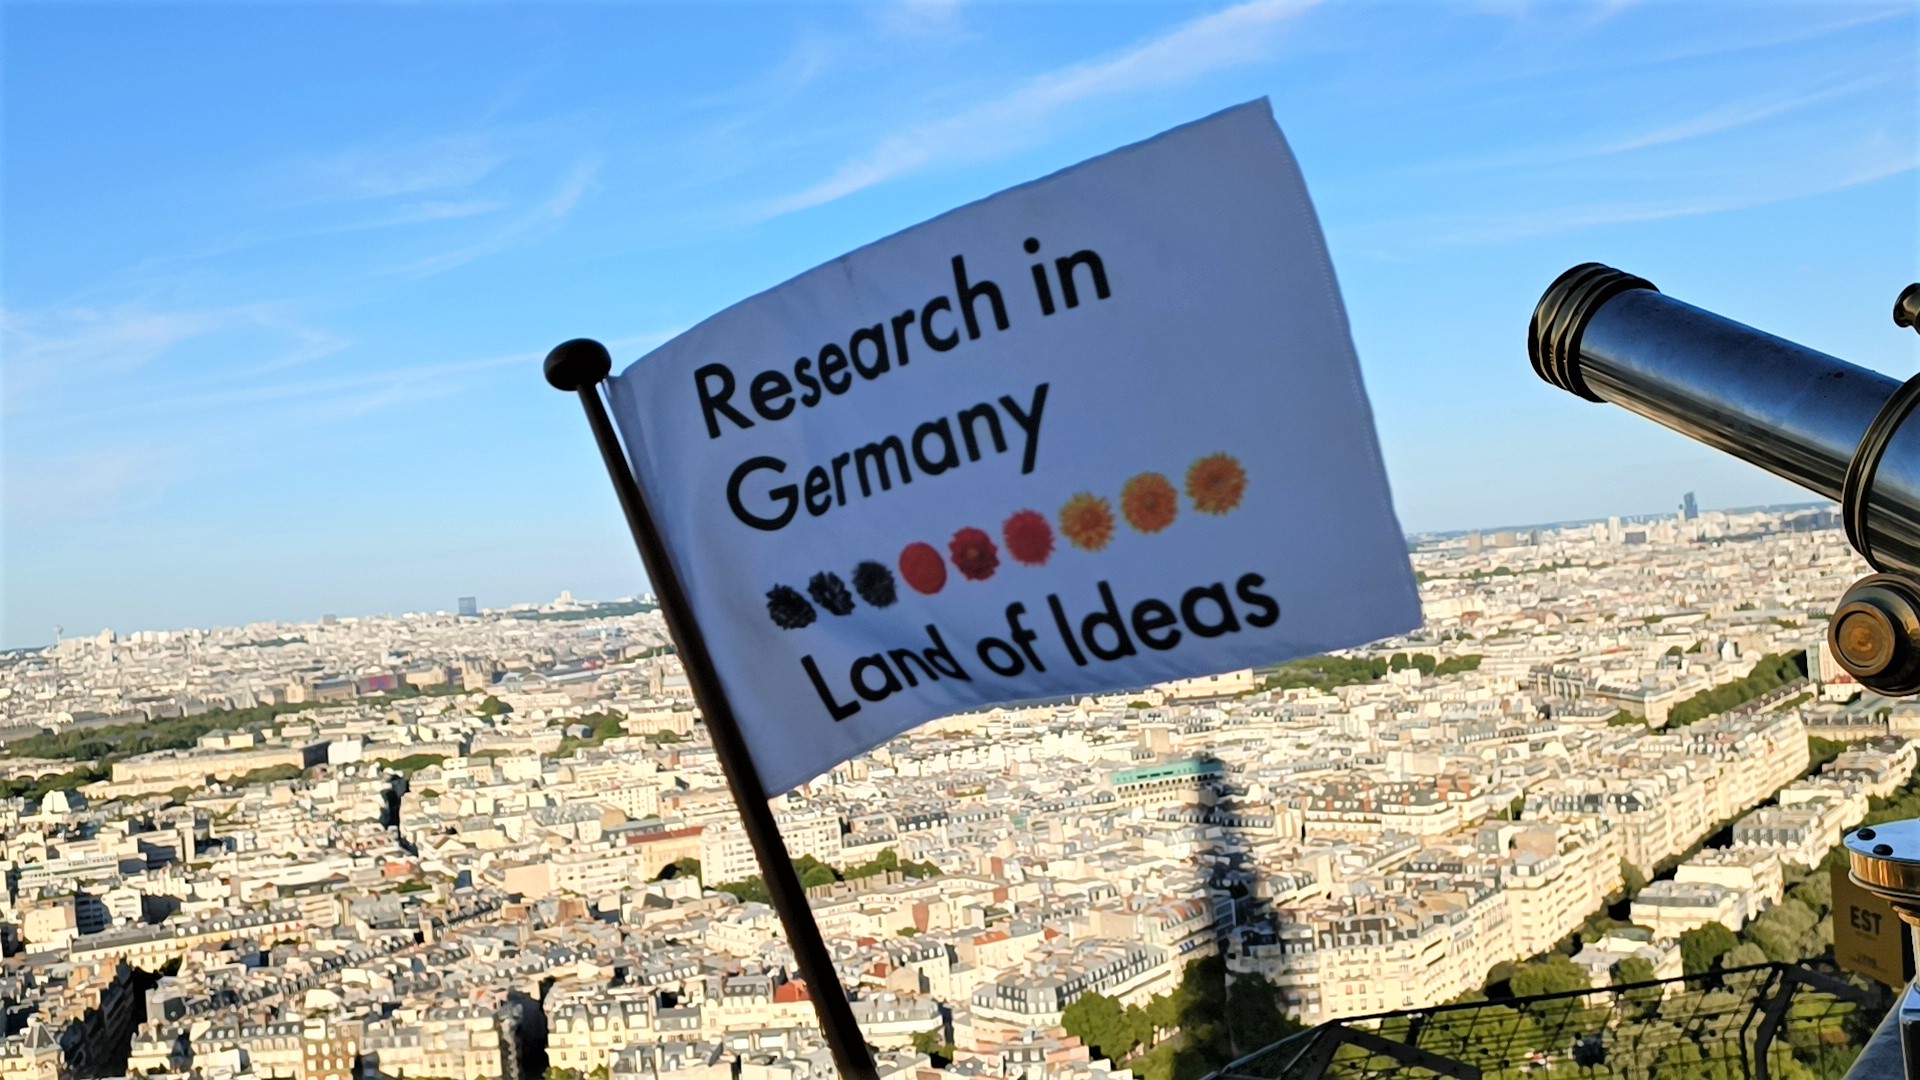 See you in France. “Research in Germany” presentation in Paris